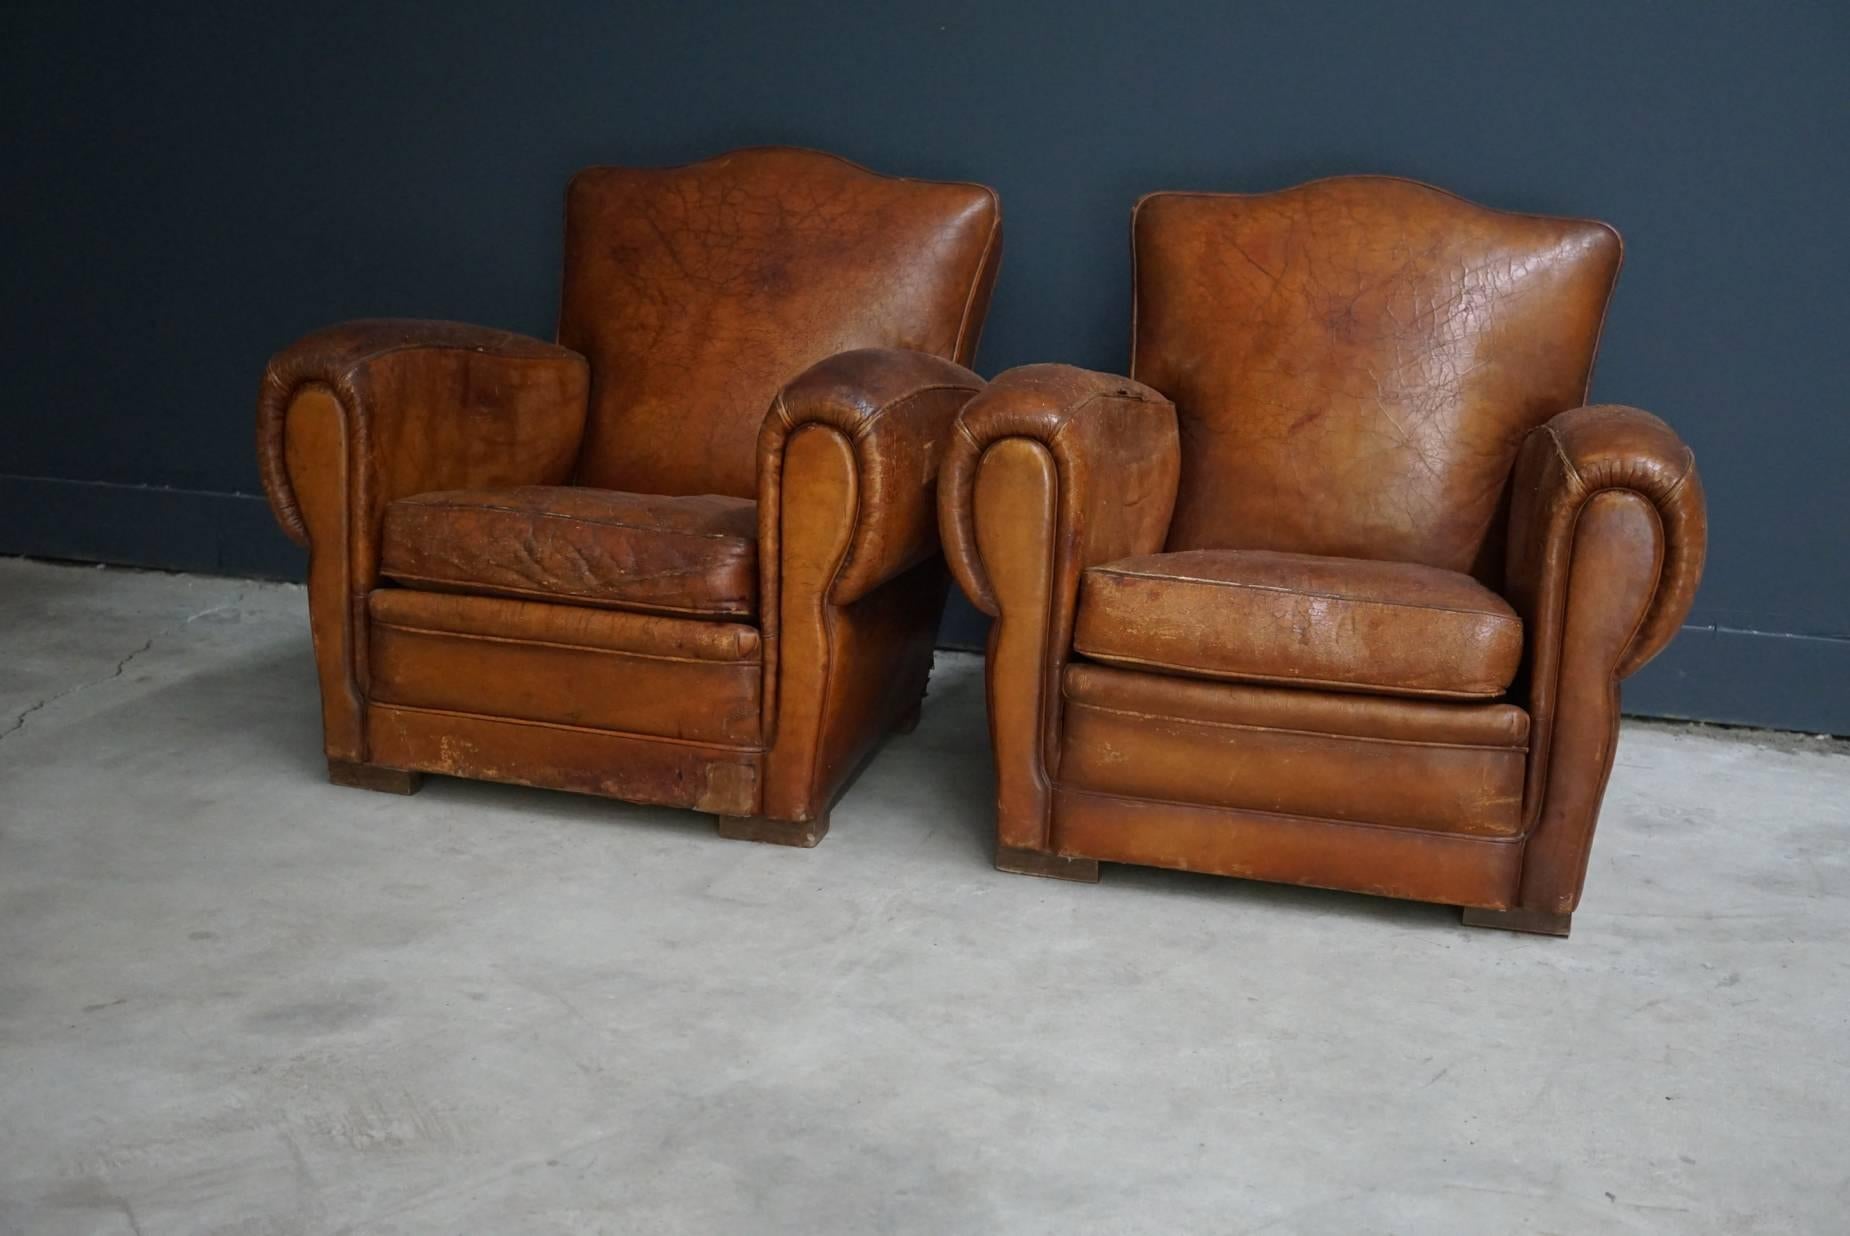 Industrial Pair of French Cognac Leather Club Chairs, 1940s